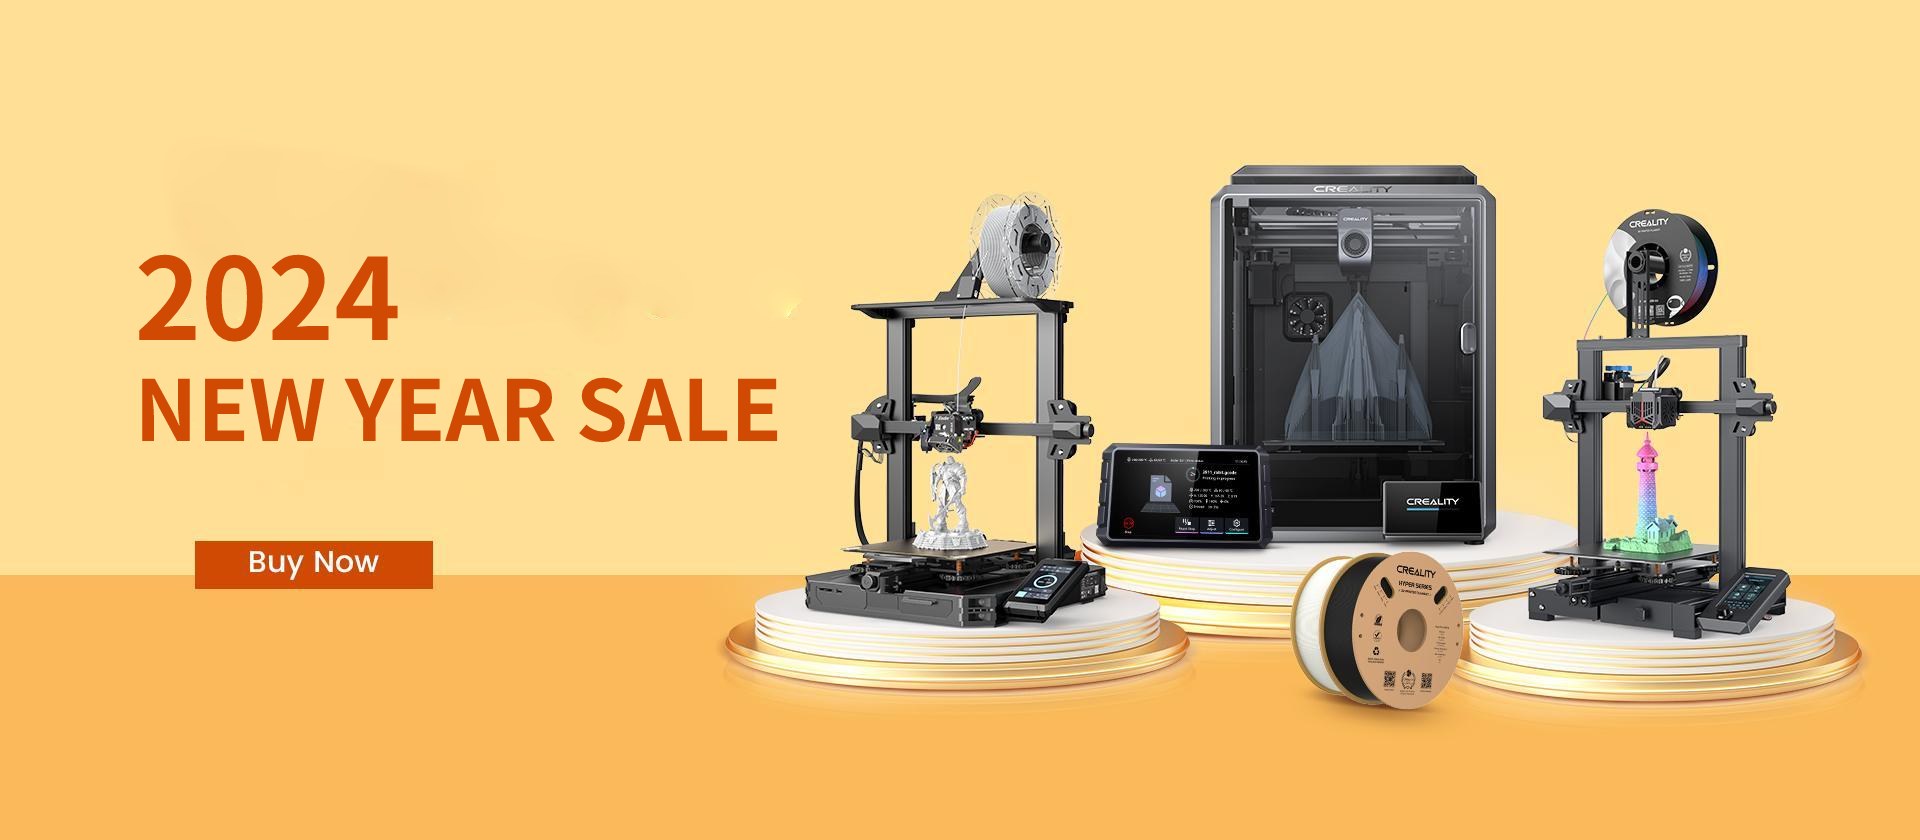 Clearance 3D Printers, Materials, and More